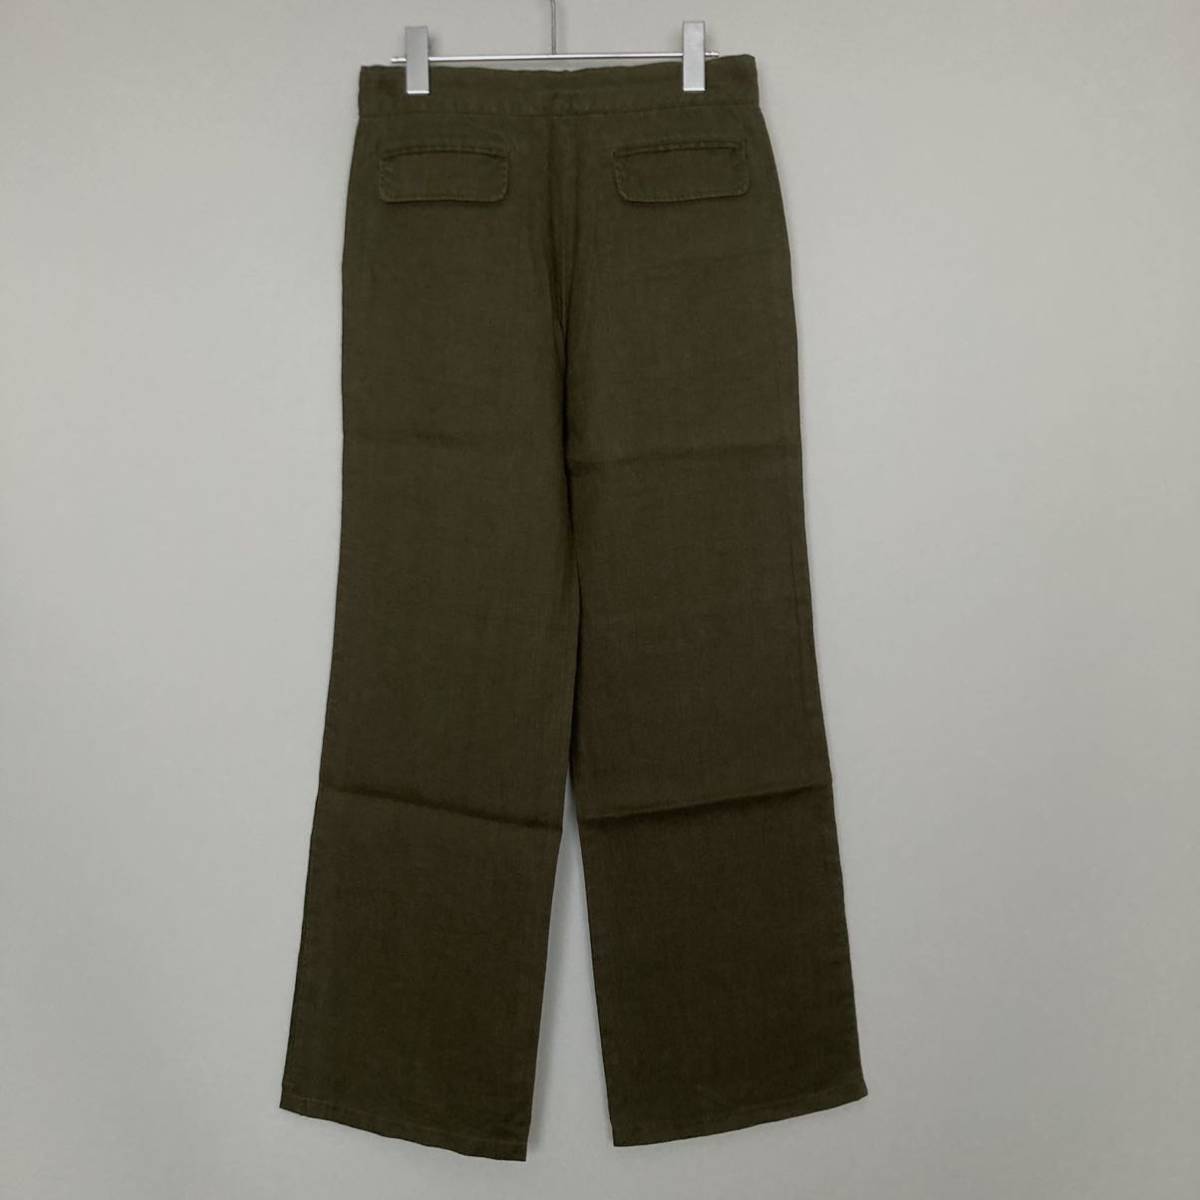  new goods unused Le minor Le Minor lady's linen Easy pants wide pants khaki size 38 made in Japan 